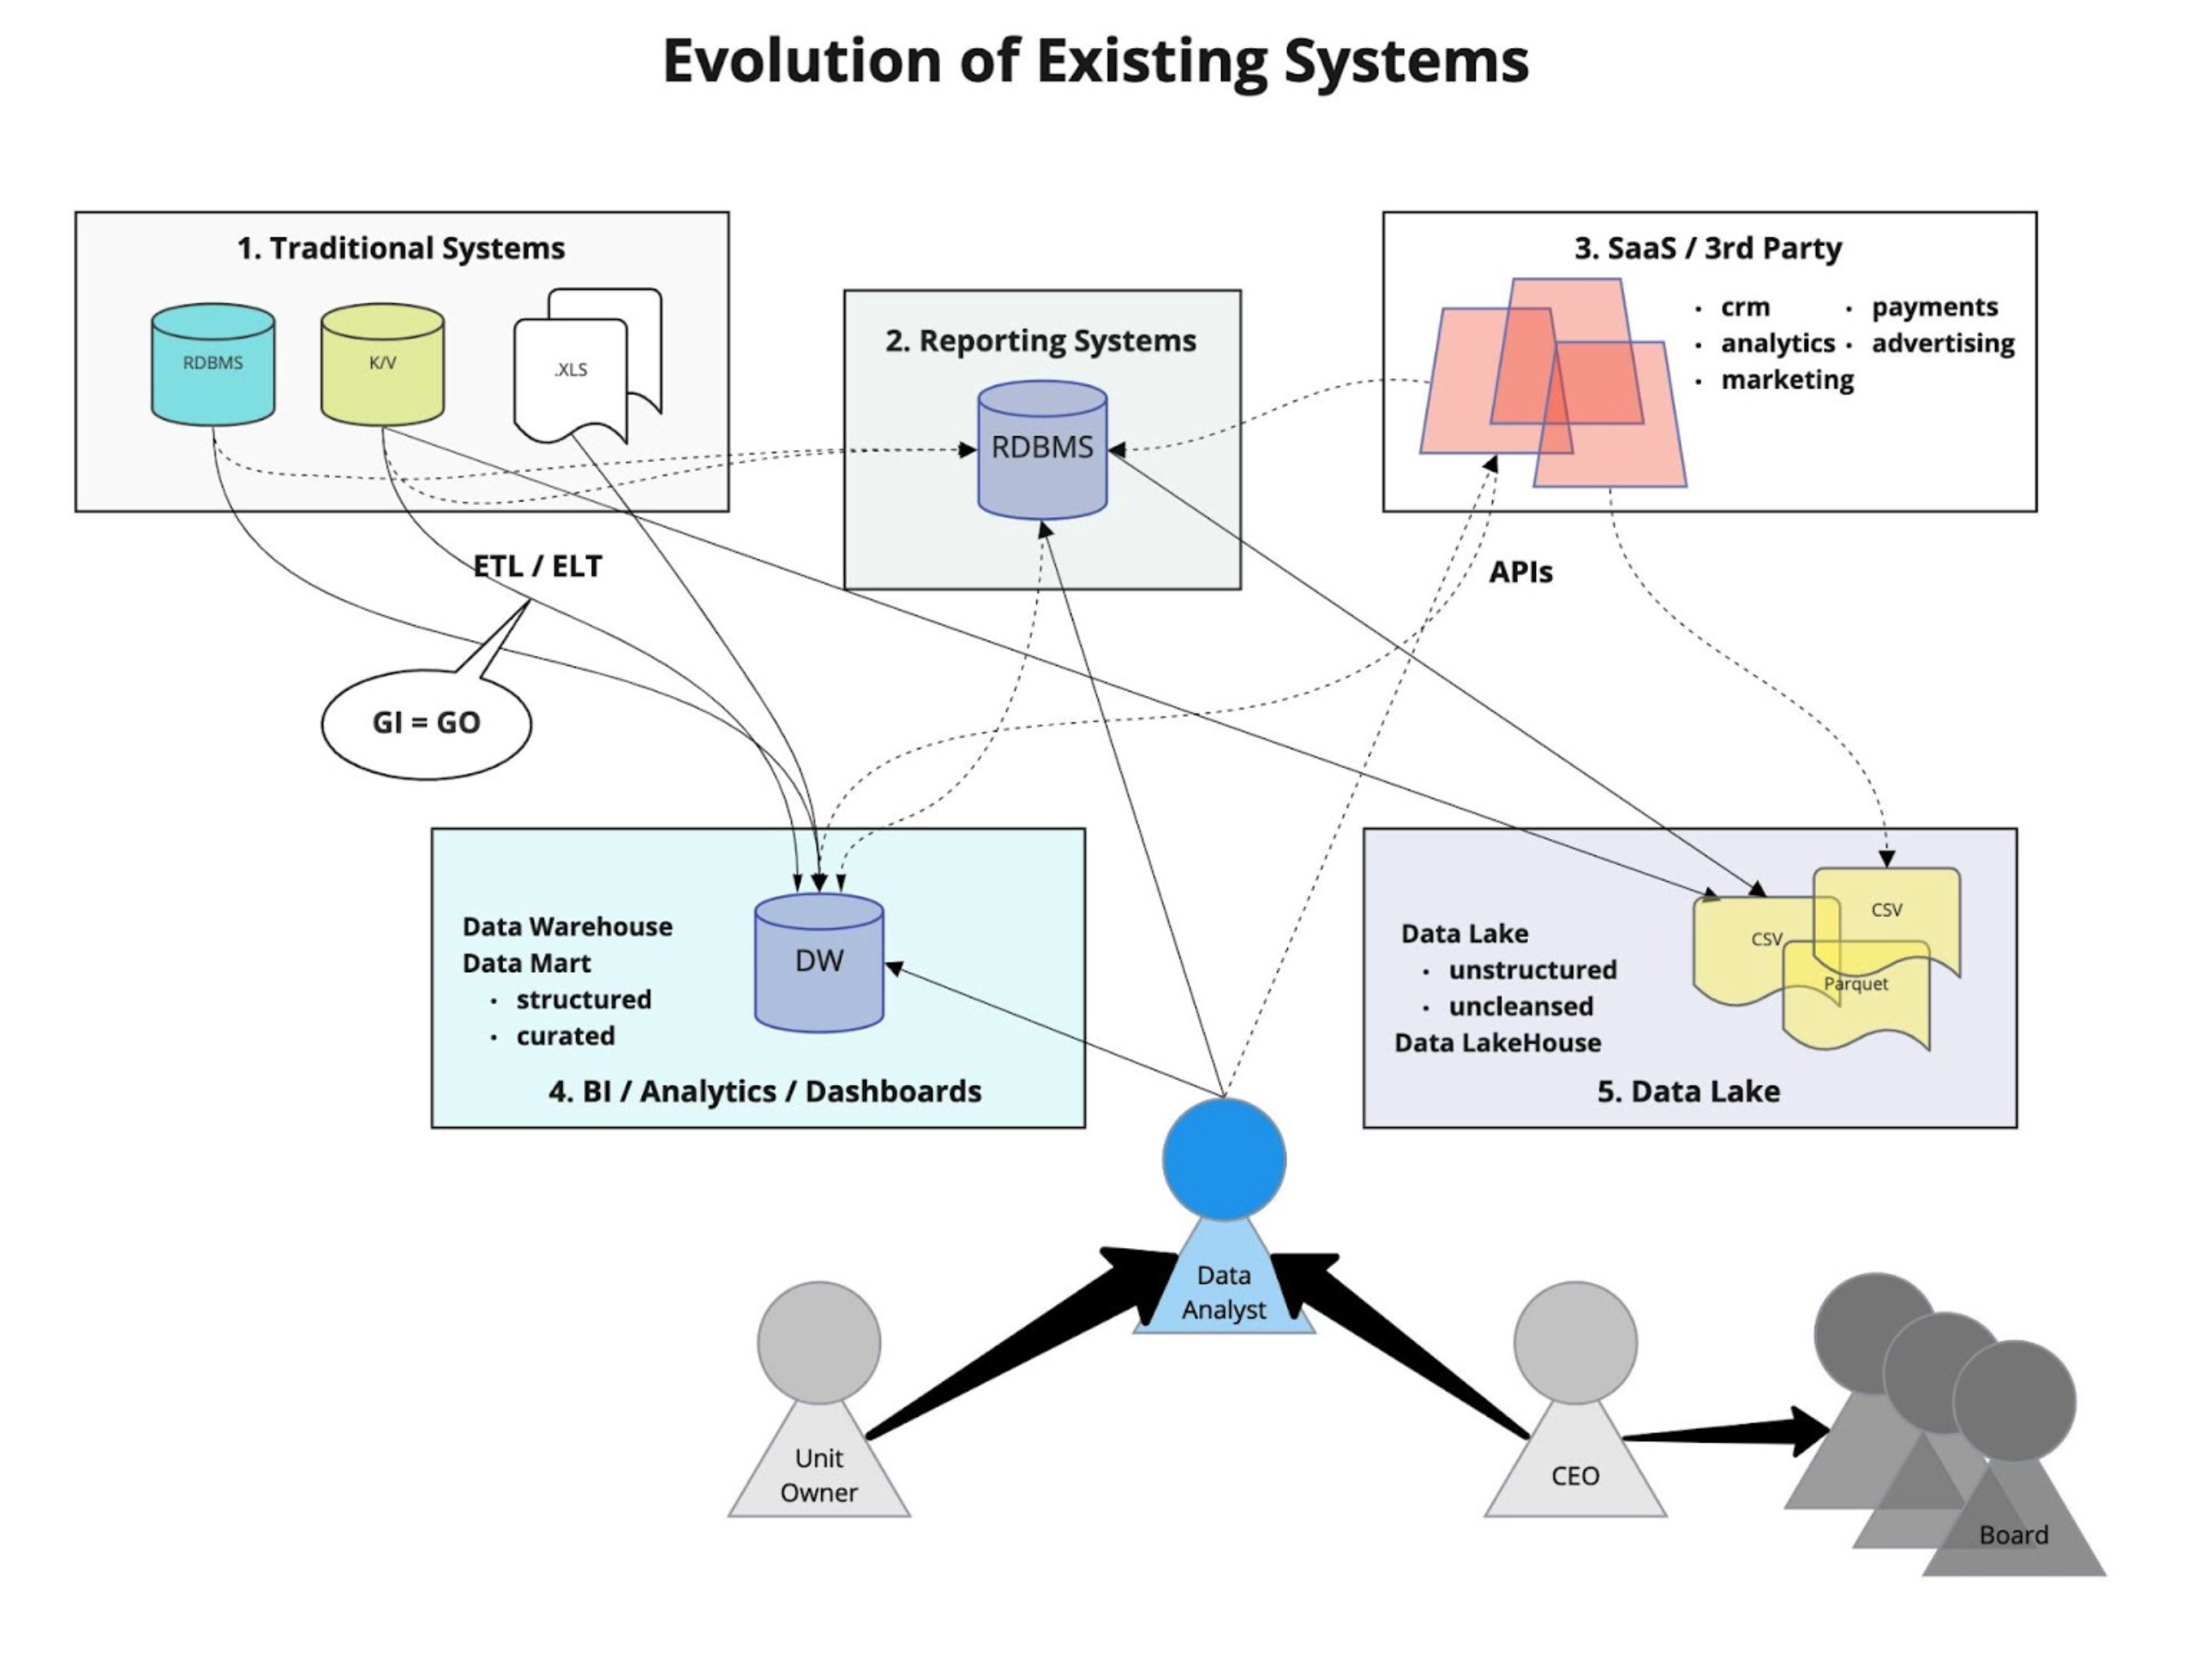 The evolution of Existing Systems